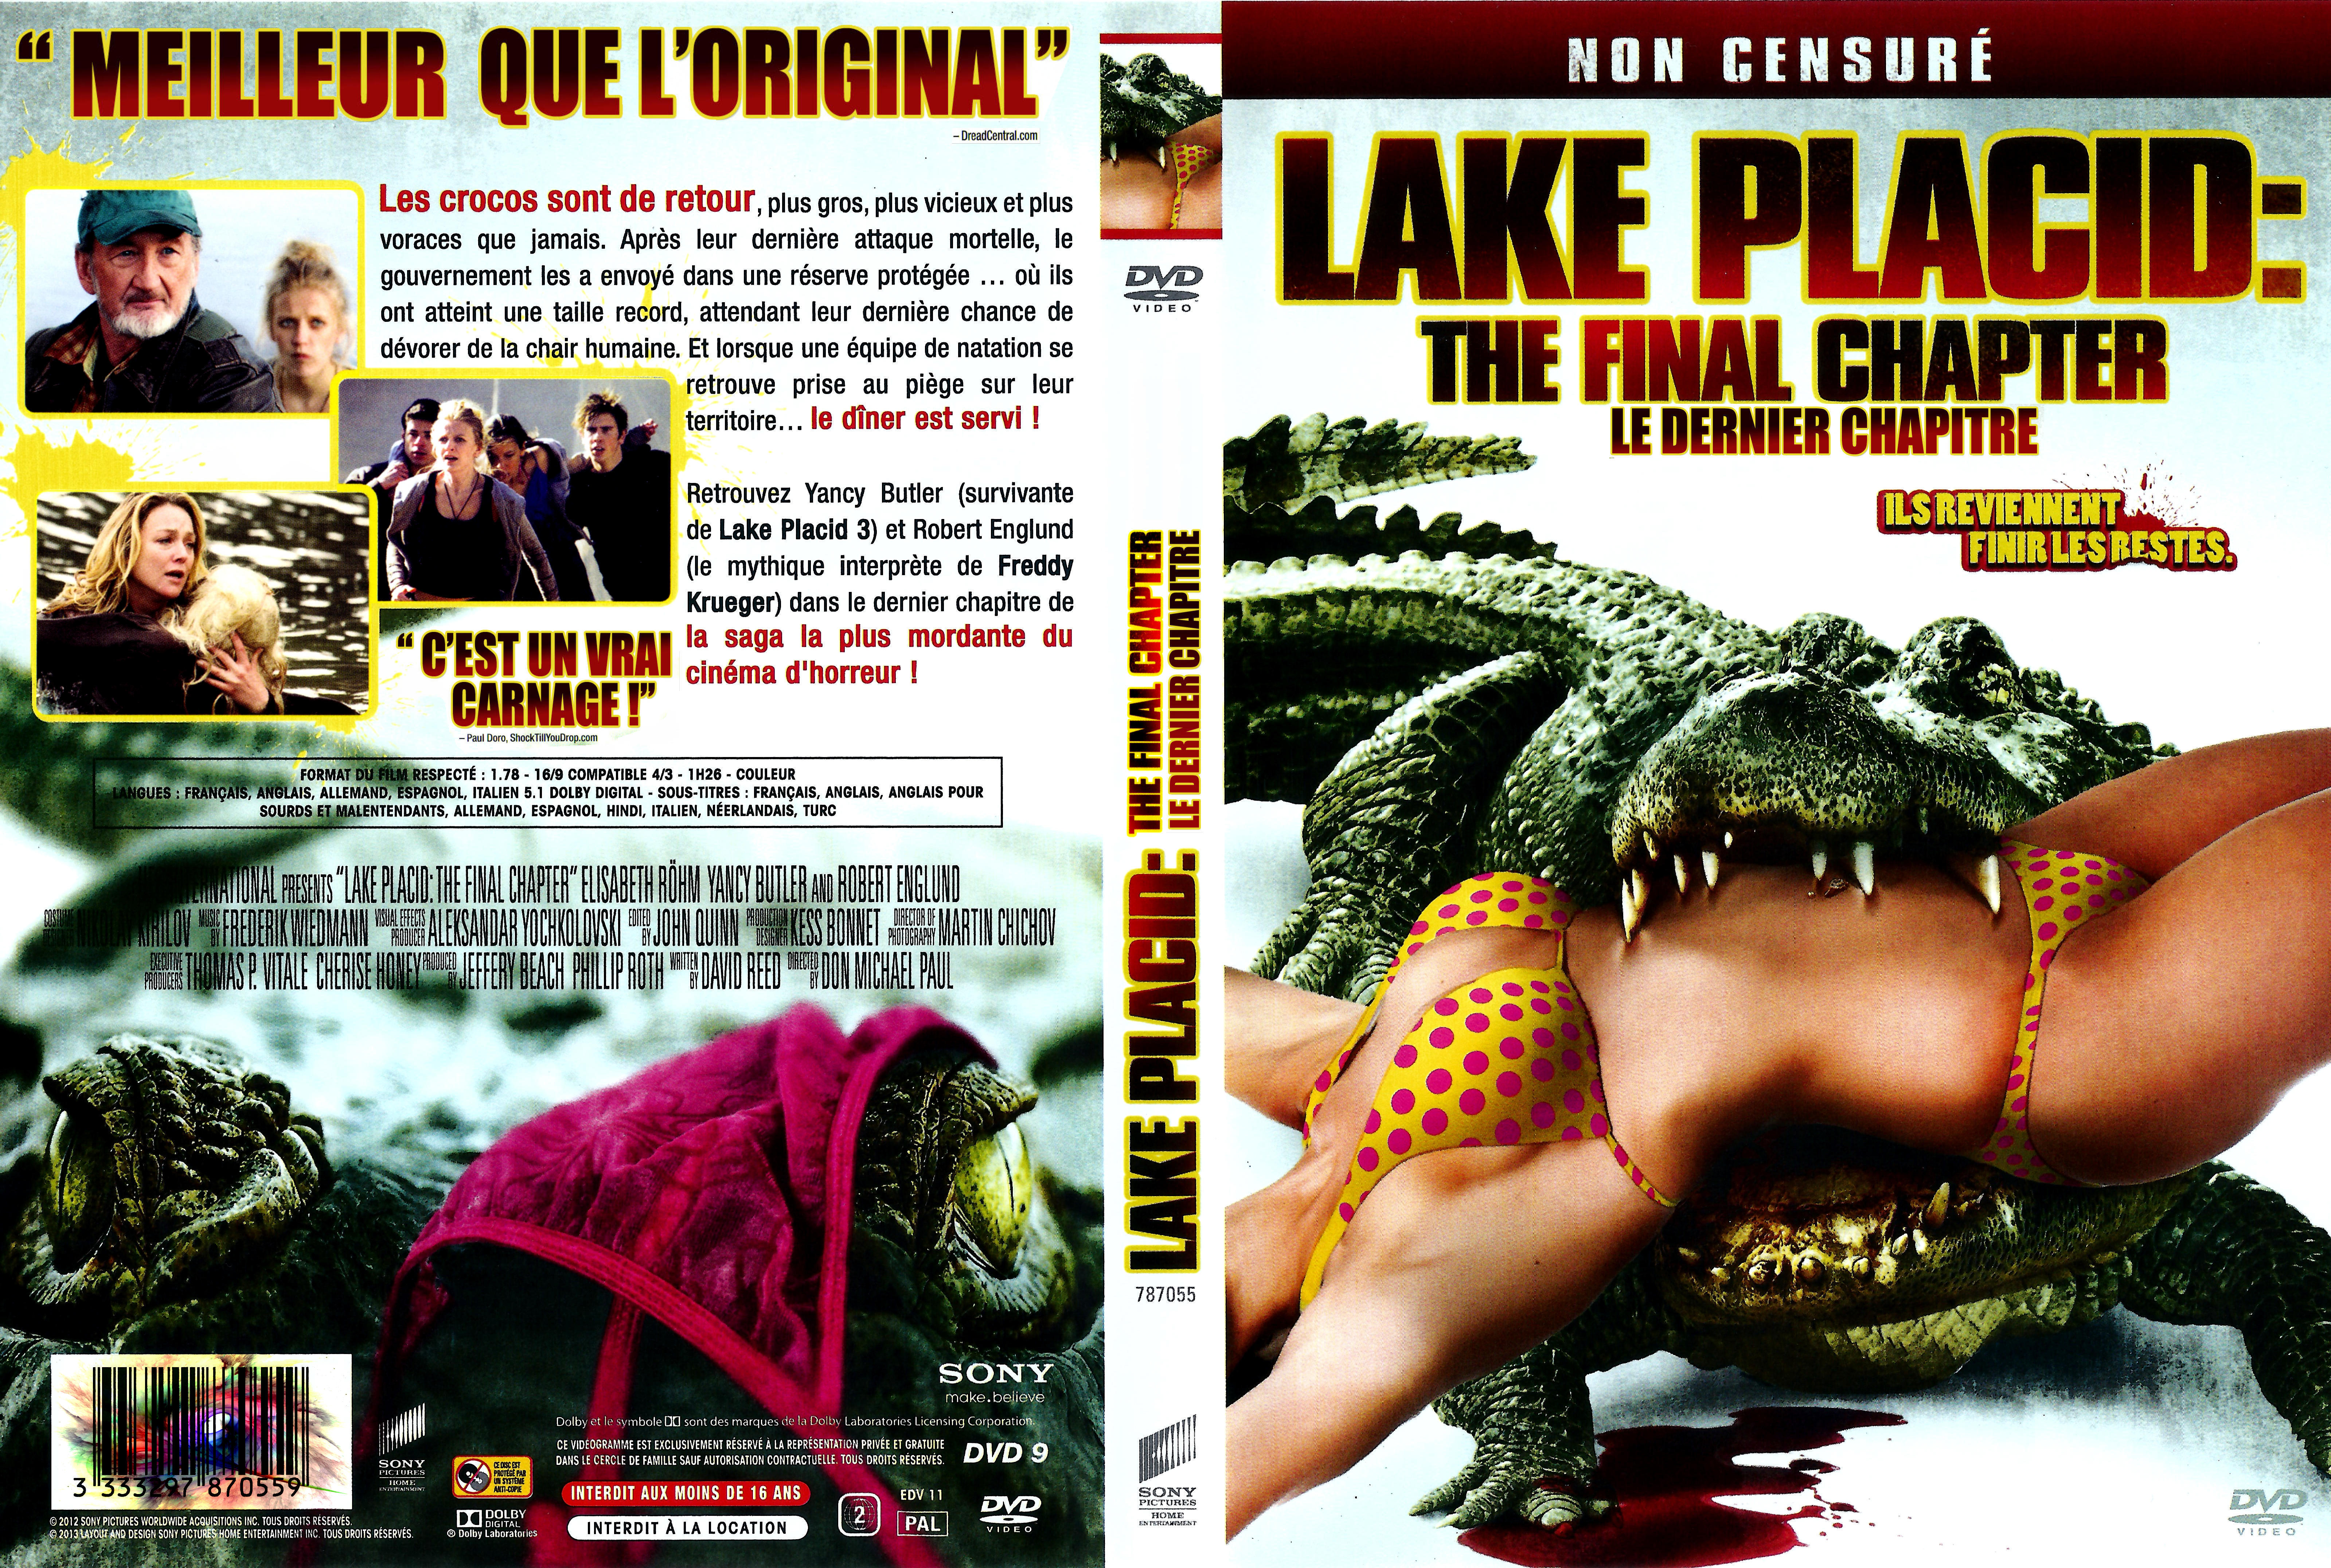 Jaquette DVD Lake Placid - The final chapter v2